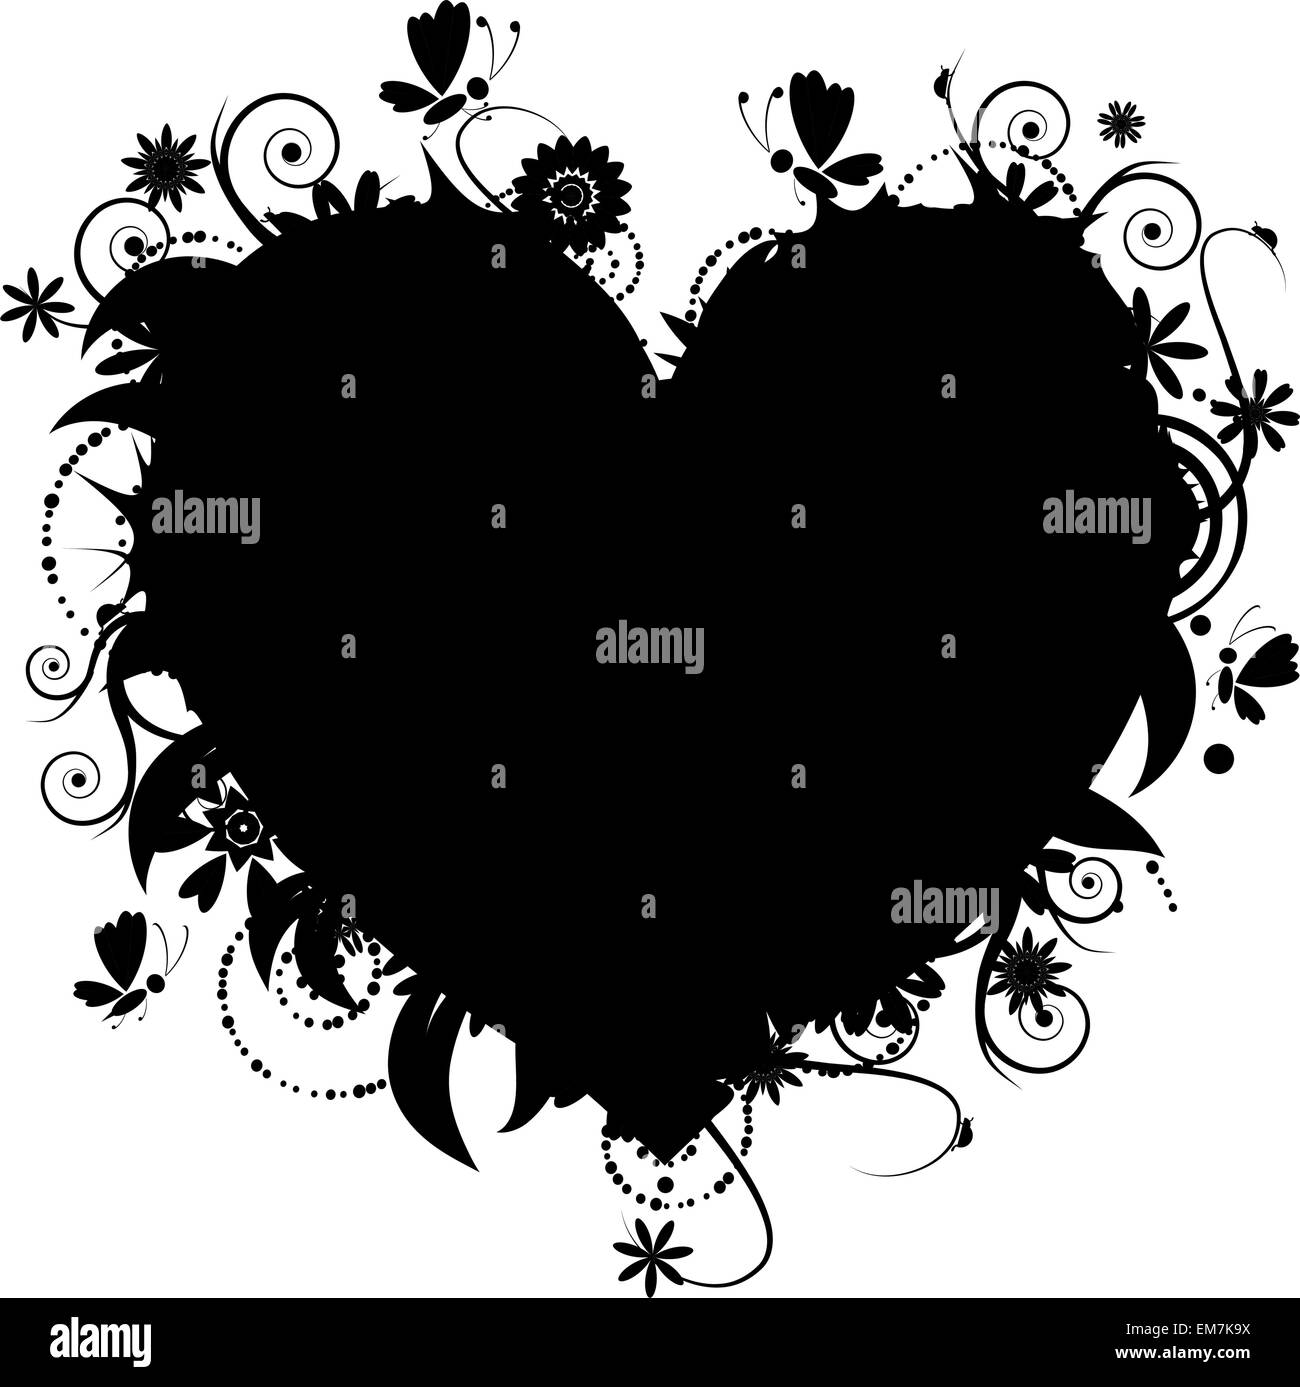 Floral heart shape Black and White Stock Photos & Images - Alamy